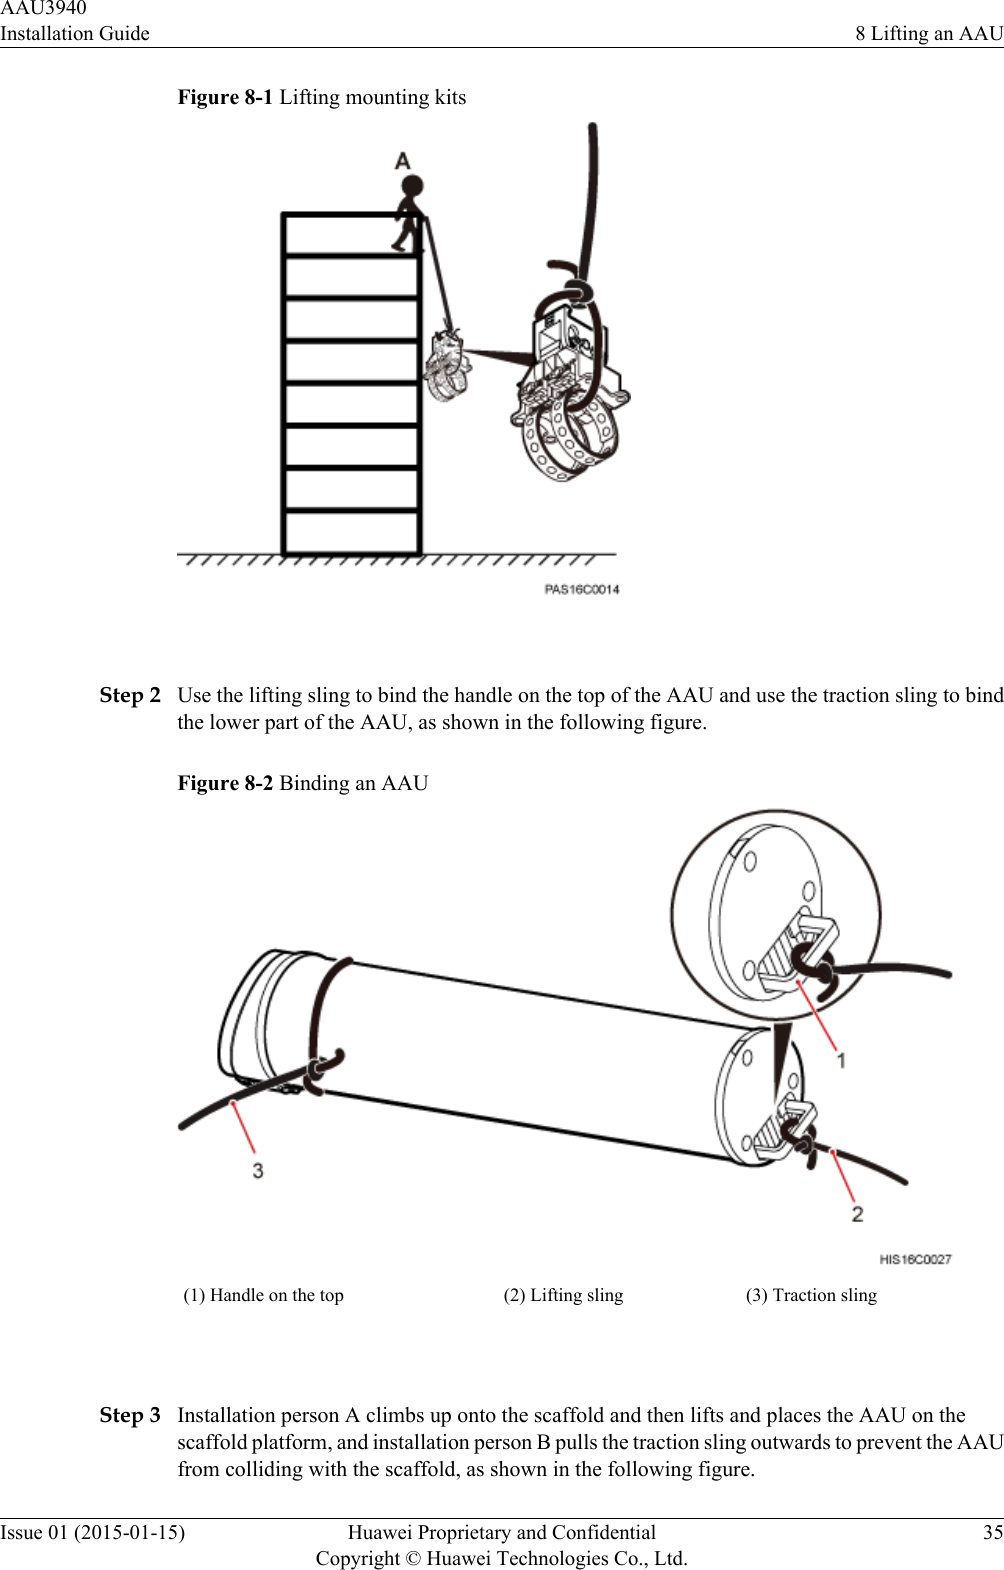 Figure 8-1 Lifting mounting kits Step 2 Use the lifting sling to bind the handle on the top of the AAU and use the traction sling to bindthe lower part of the AAU, as shown in the following figure.Figure 8-2 Binding an AAU(1) Handle on the top (2) Lifting sling (3) Traction sling Step 3 Installation person A climbs up onto the scaffold and then lifts and places the AAU on thescaffold platform, and installation person B pulls the traction sling outwards to prevent the AAUfrom colliding with the scaffold, as shown in the following figure.AAU3940Installation Guide 8 Lifting an AAUIssue 01 (2015-01-15) Huawei Proprietary and ConfidentialCopyright © Huawei Technologies Co., Ltd.35